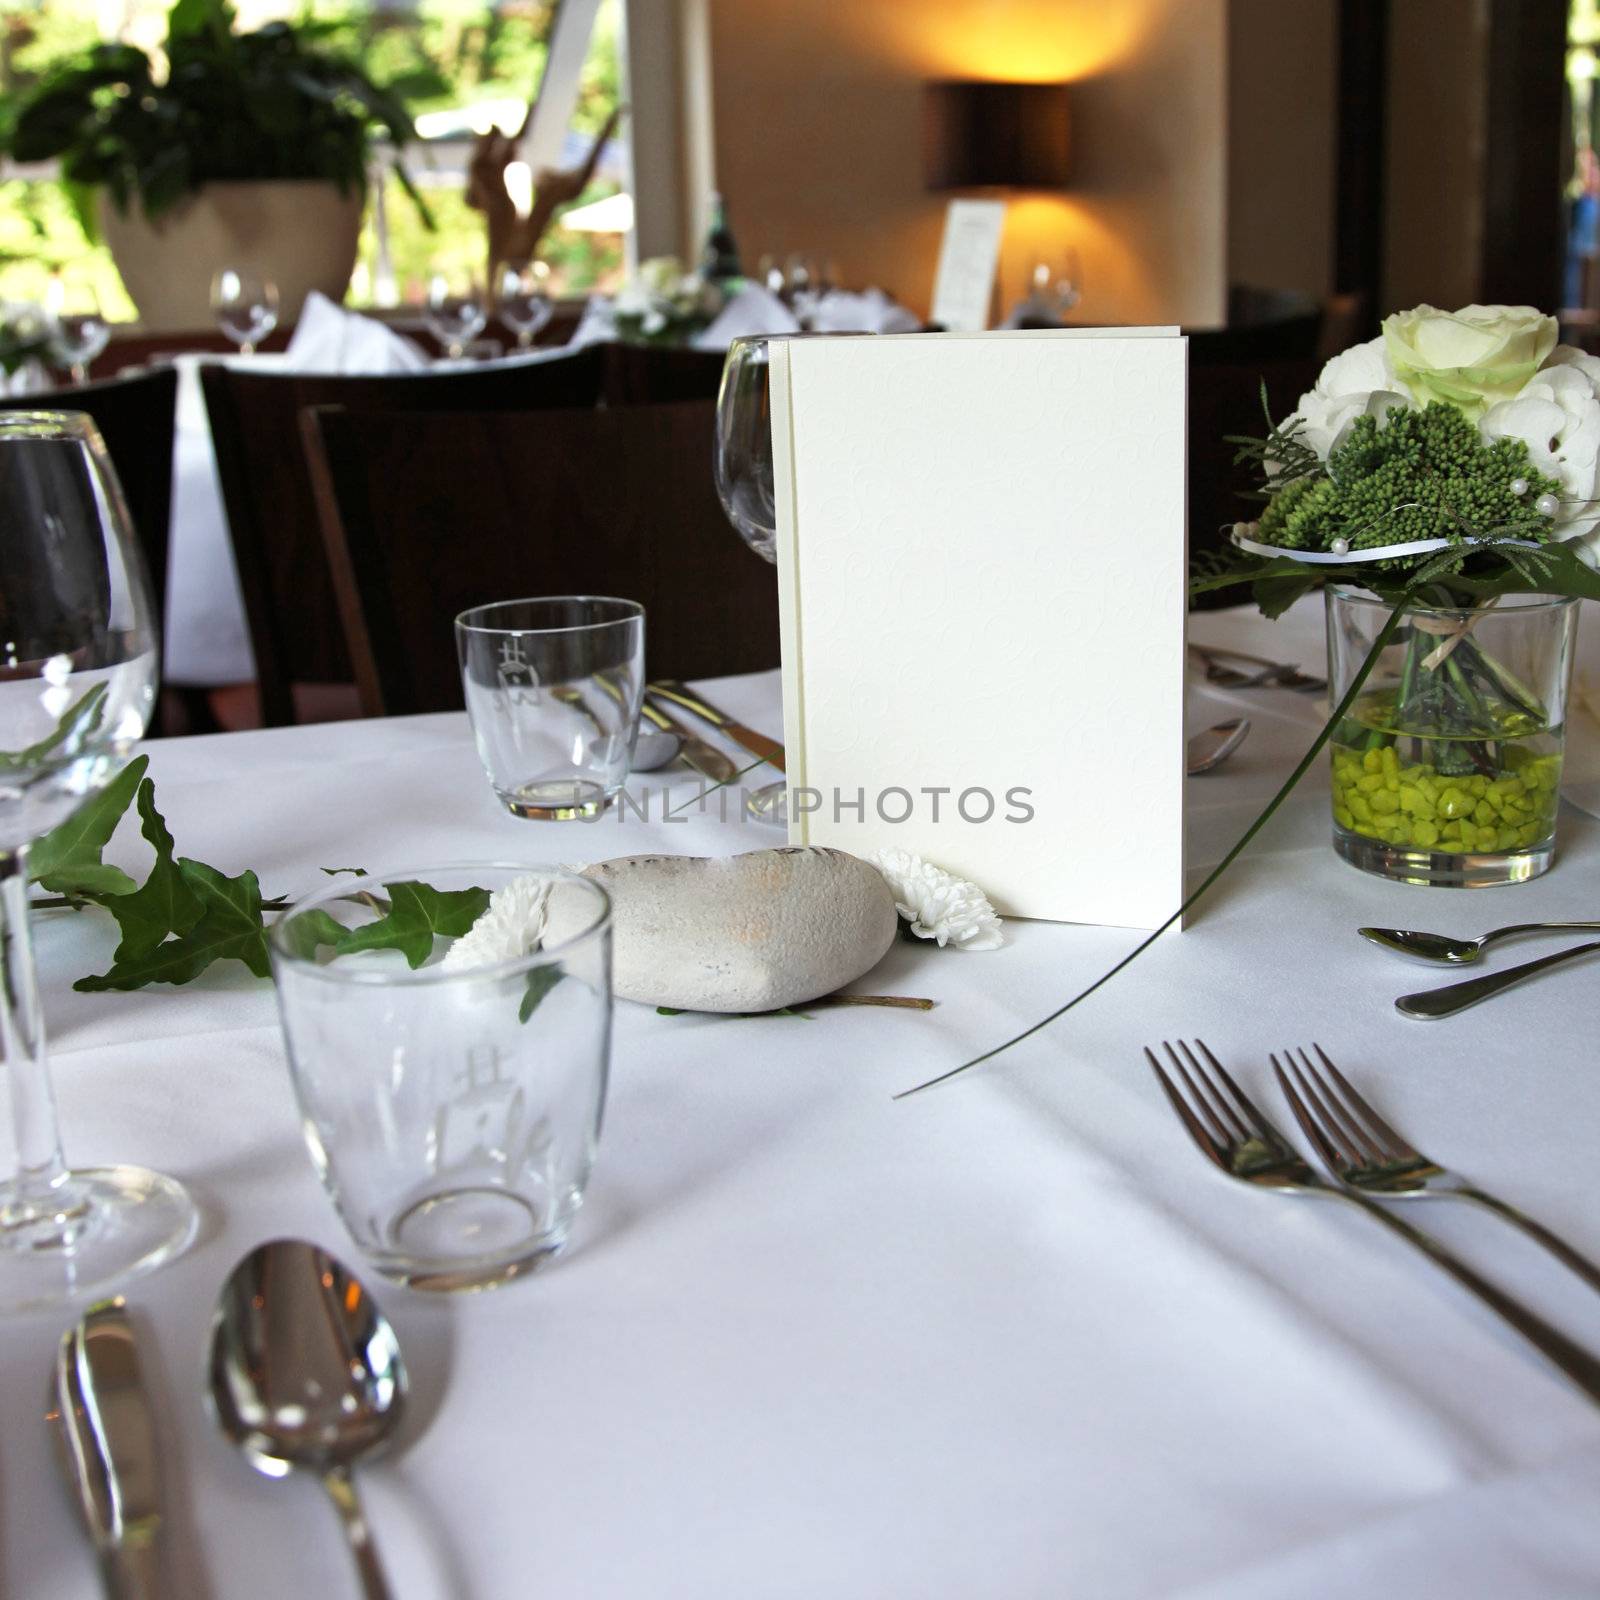 menu card on an elegantly set table in the restaurant